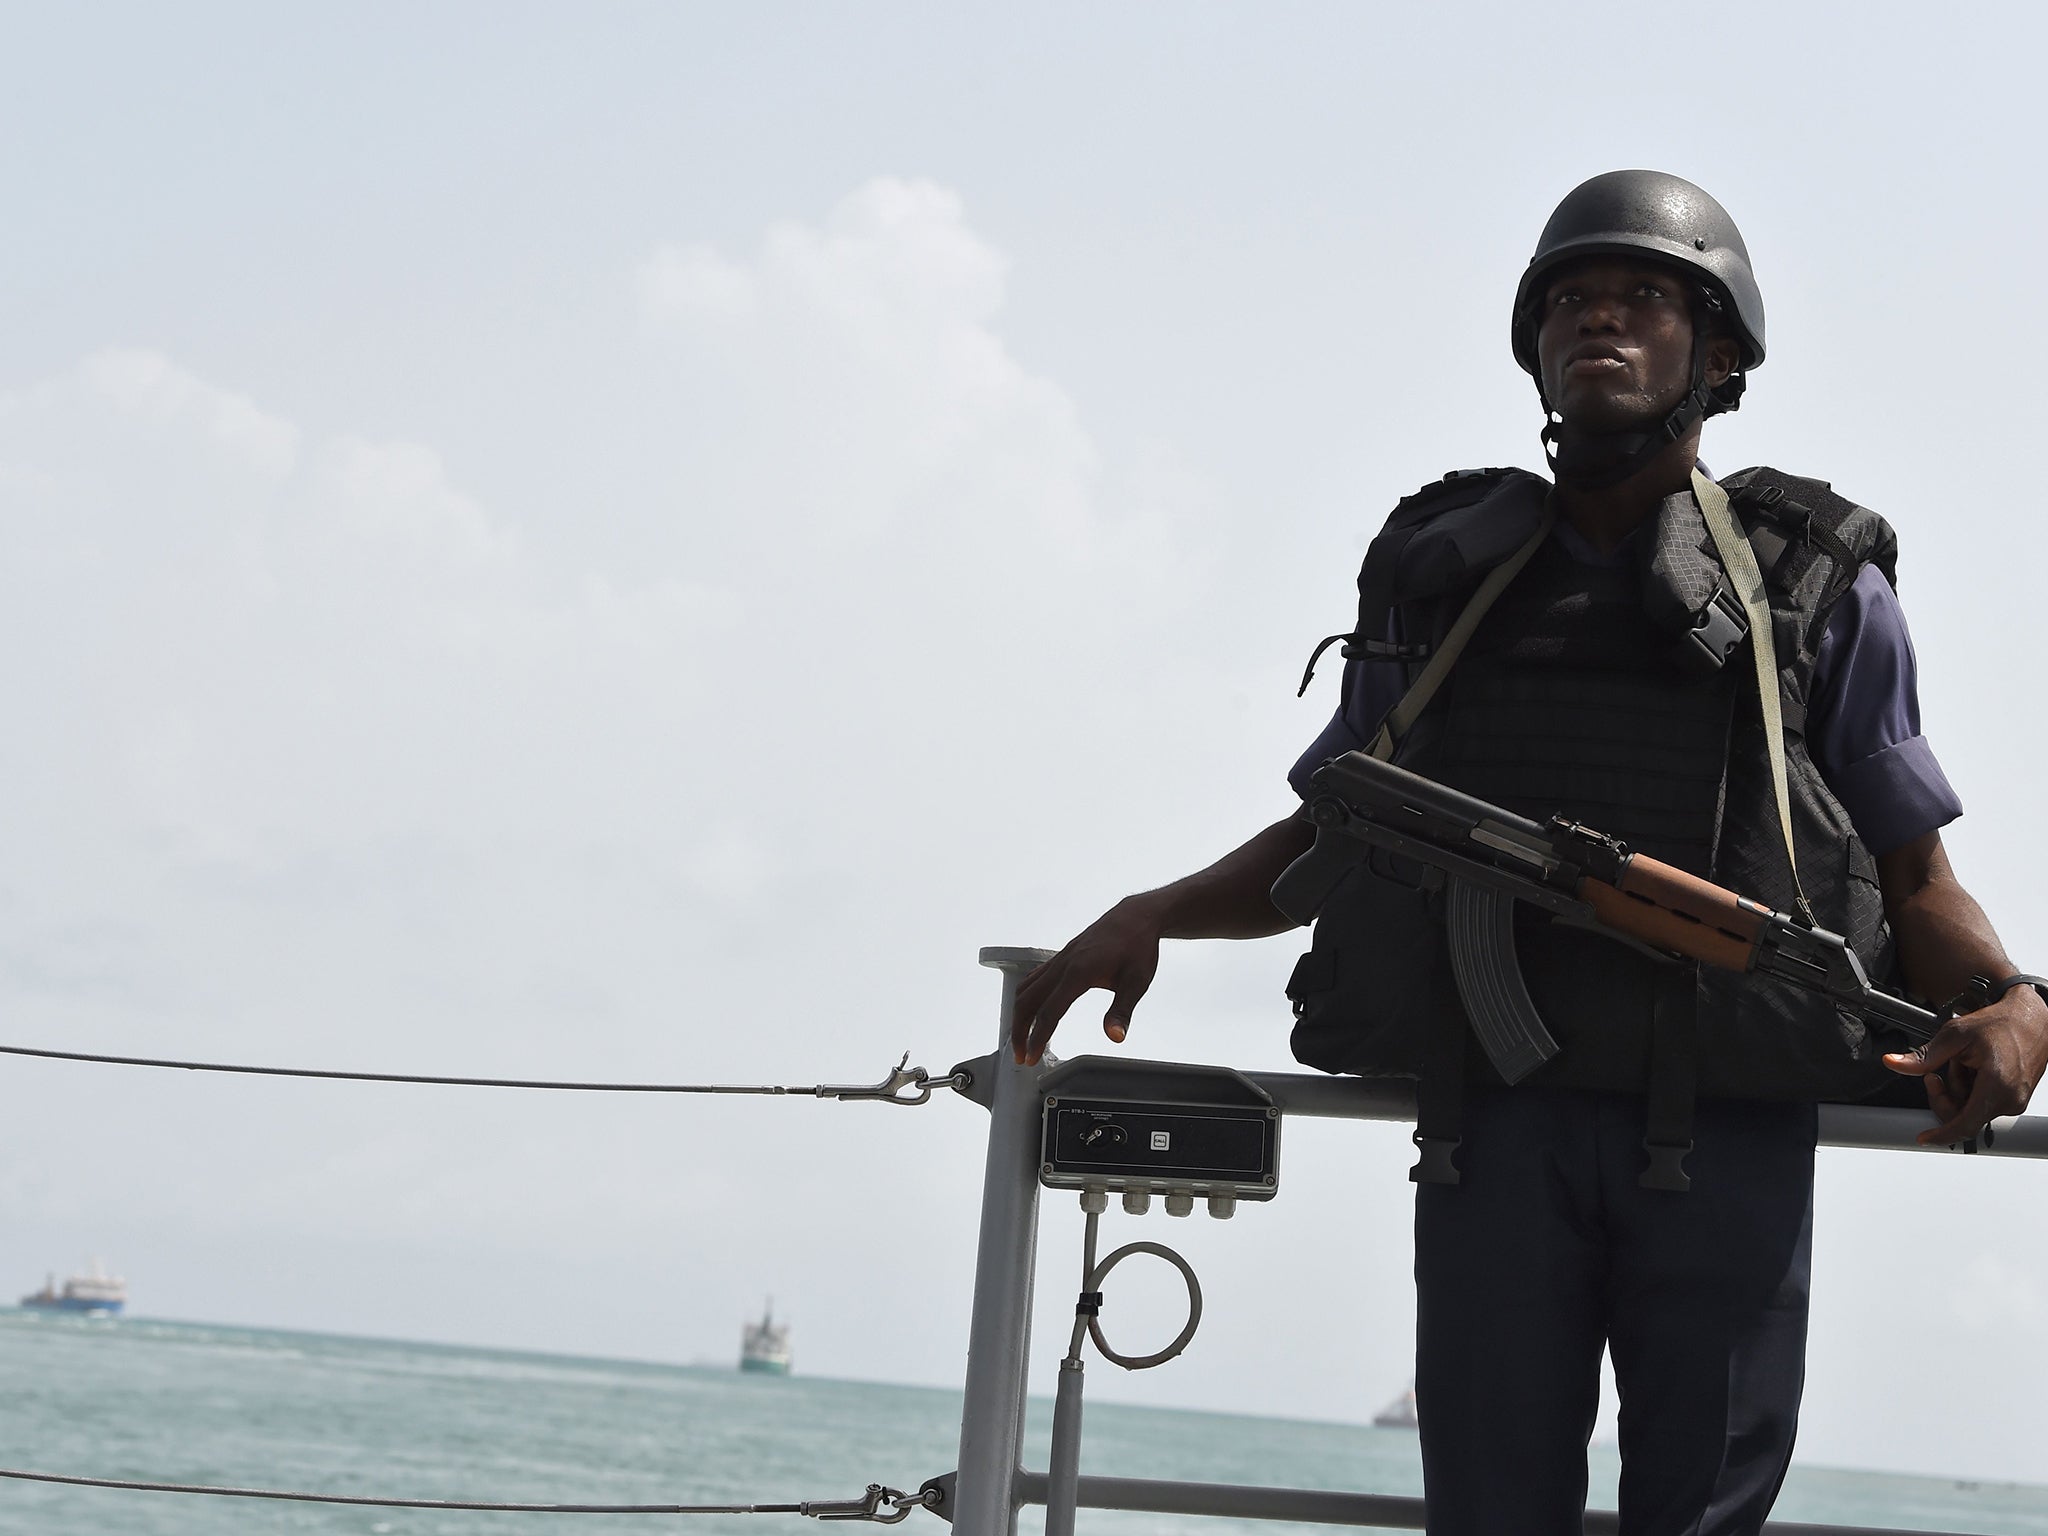 The Gulf of Guinea has been described as the most dangerous area in the world for piracy